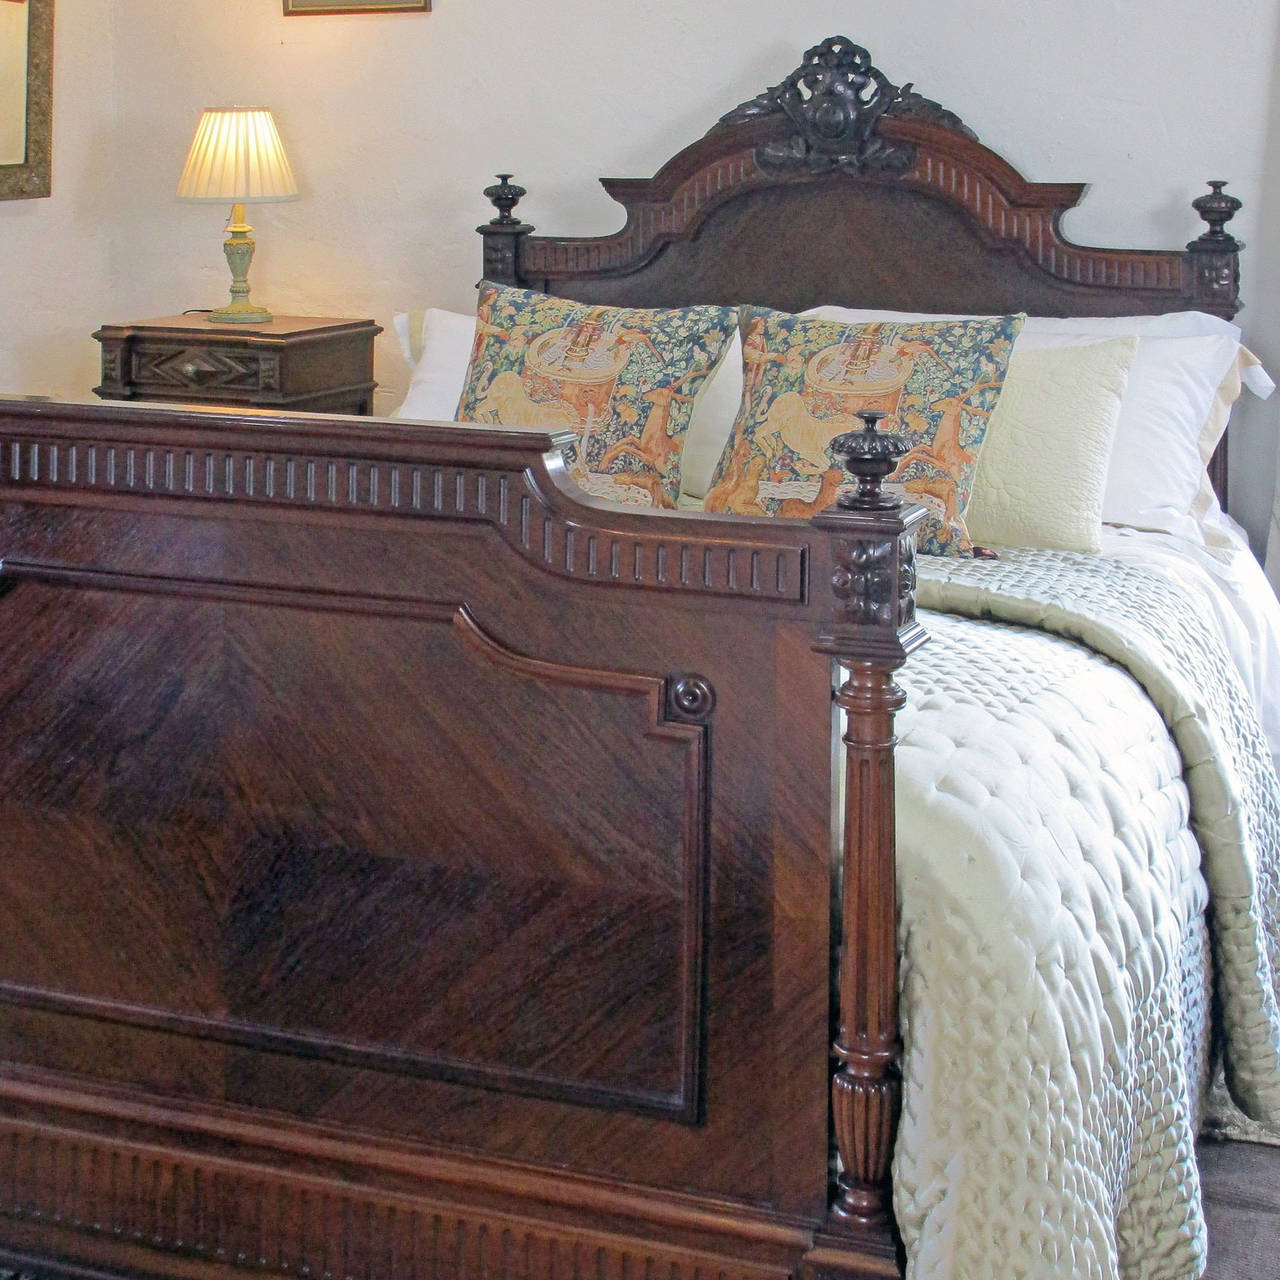 Mahogany Renaissance style bed with deep rich patina quarter panels and decorative posts. Circa 1900.
This bed accepts a 5ft wide bed base and mattress set.
The price is for the bedstead alone, the bed base, mattress and all of the bedding can be